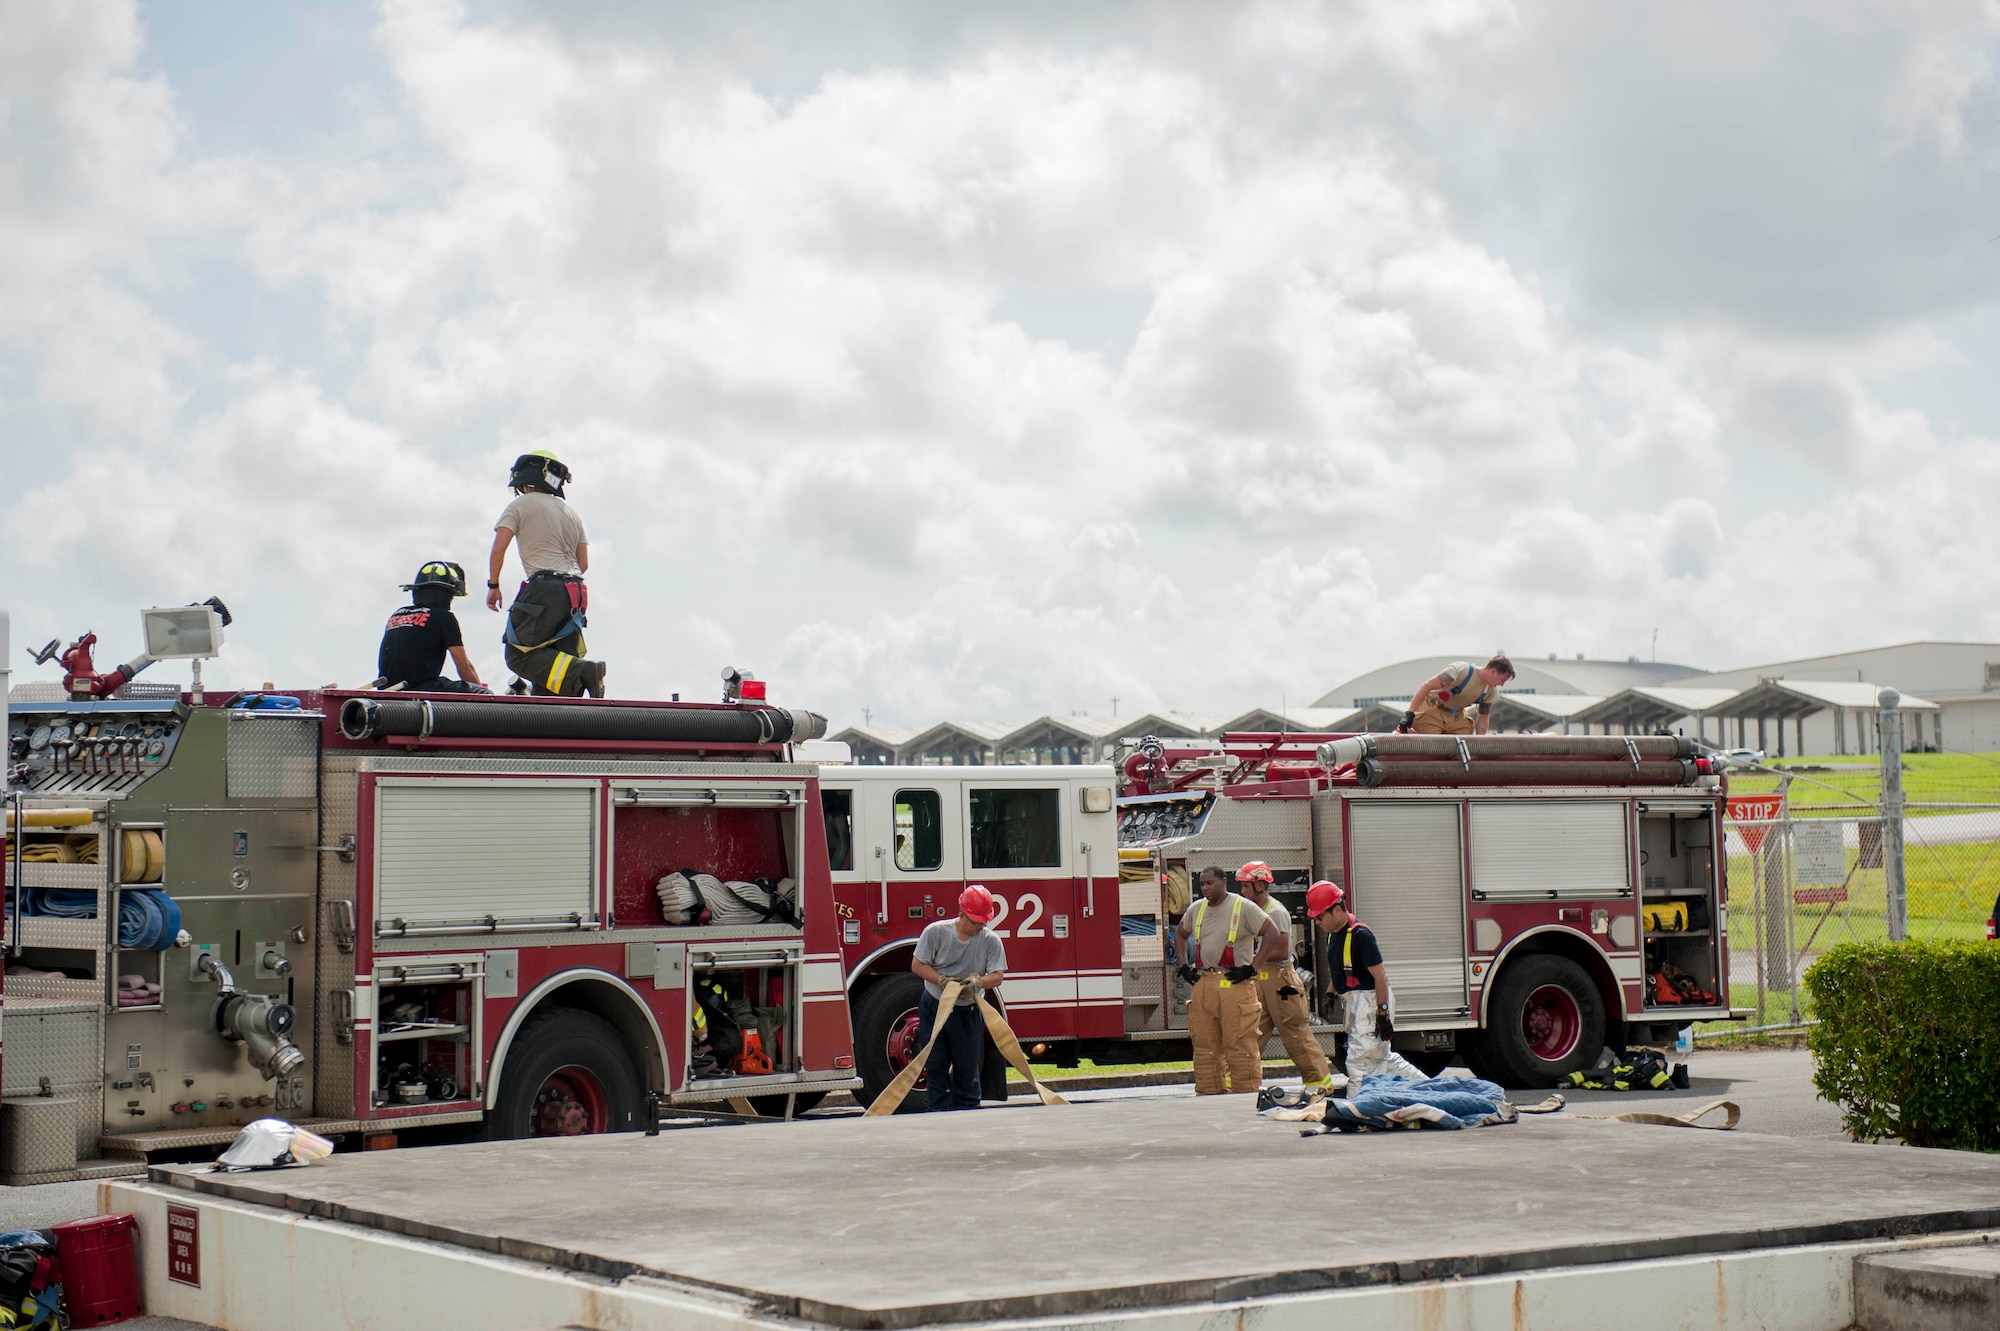 Firefighters of the 18th Civil Engineer Squadron secure fire hoses during a tower evacuation drill Aug. 15, 2016, at Kadena Air Base, Japan. Firefighters trained in the tower to become familiar with the facility in the event there is a need for a real-world emergency evacuation. (U.S. Air Force photo by Senior Airman Peter Reft)